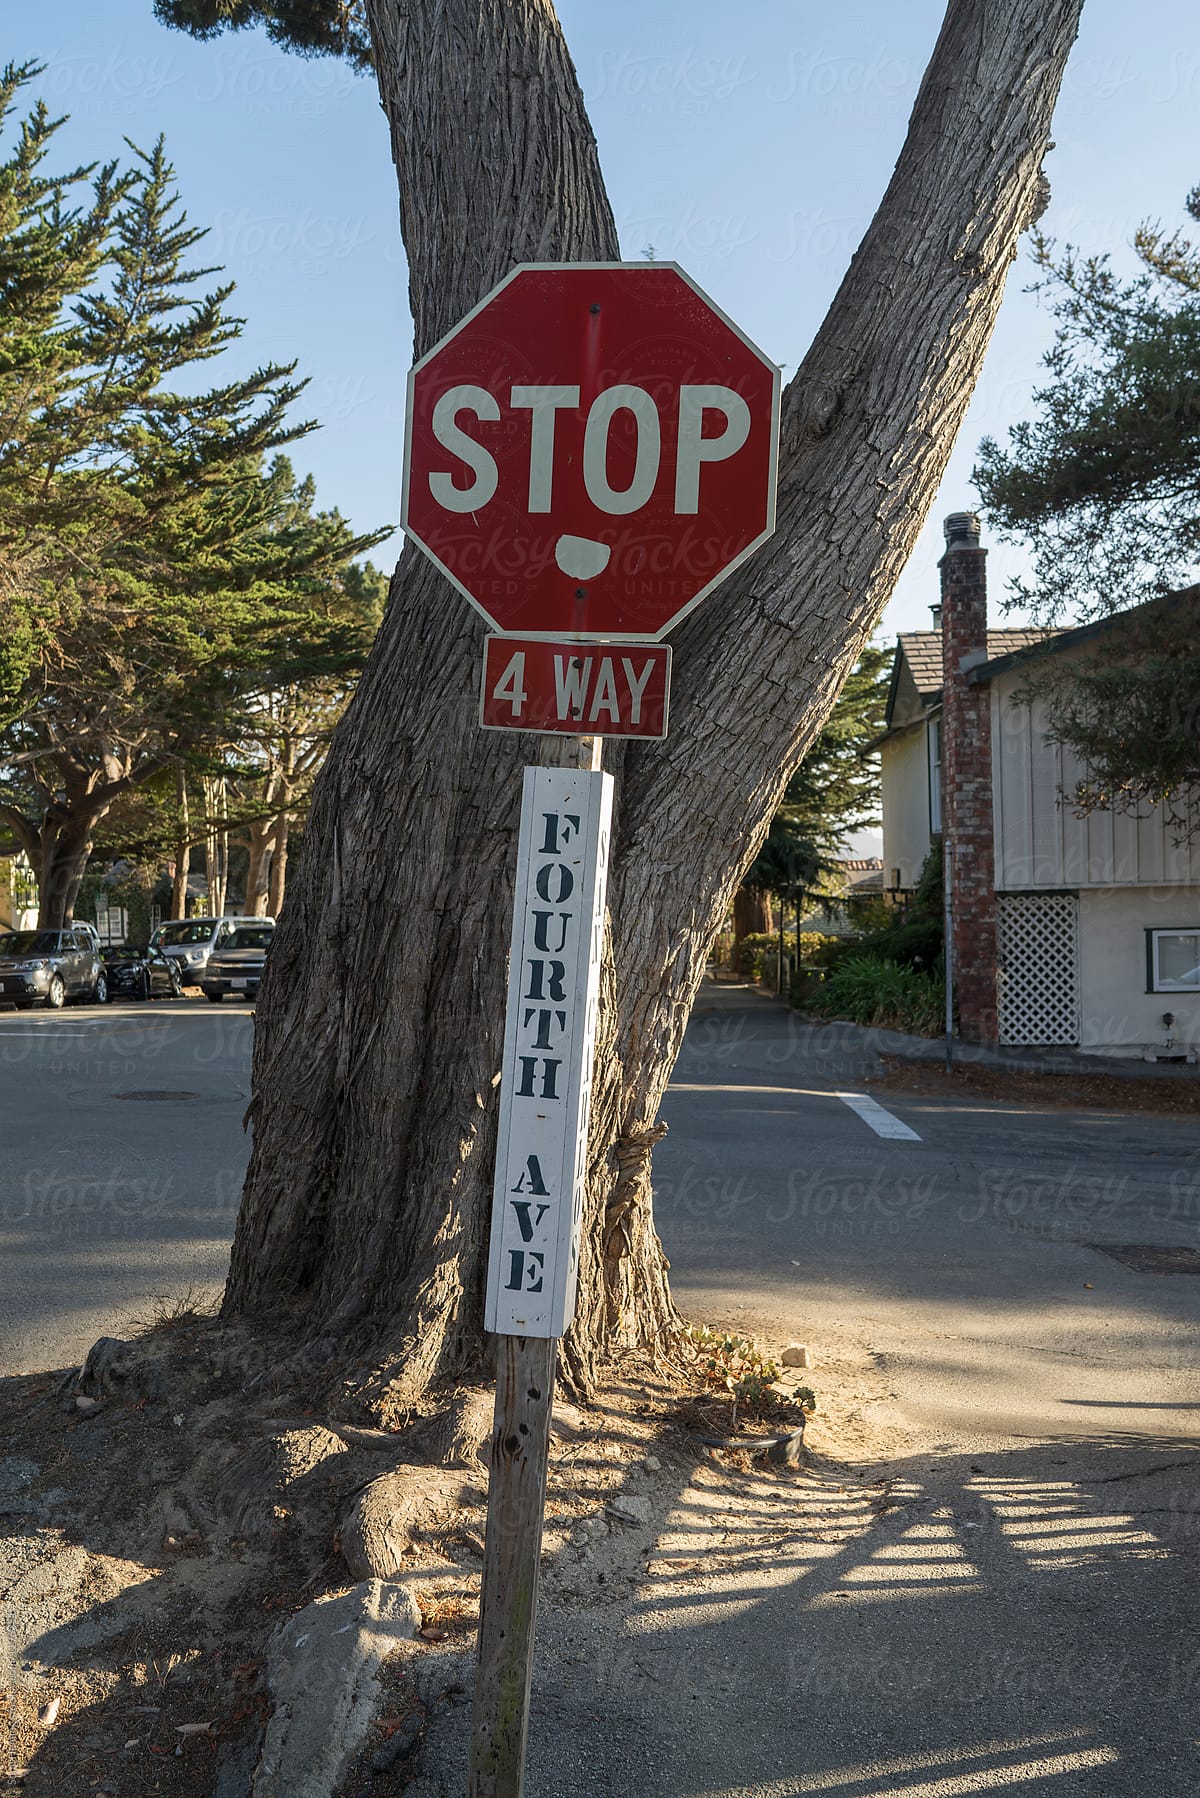 Stop sign at an intersection with a street in the background